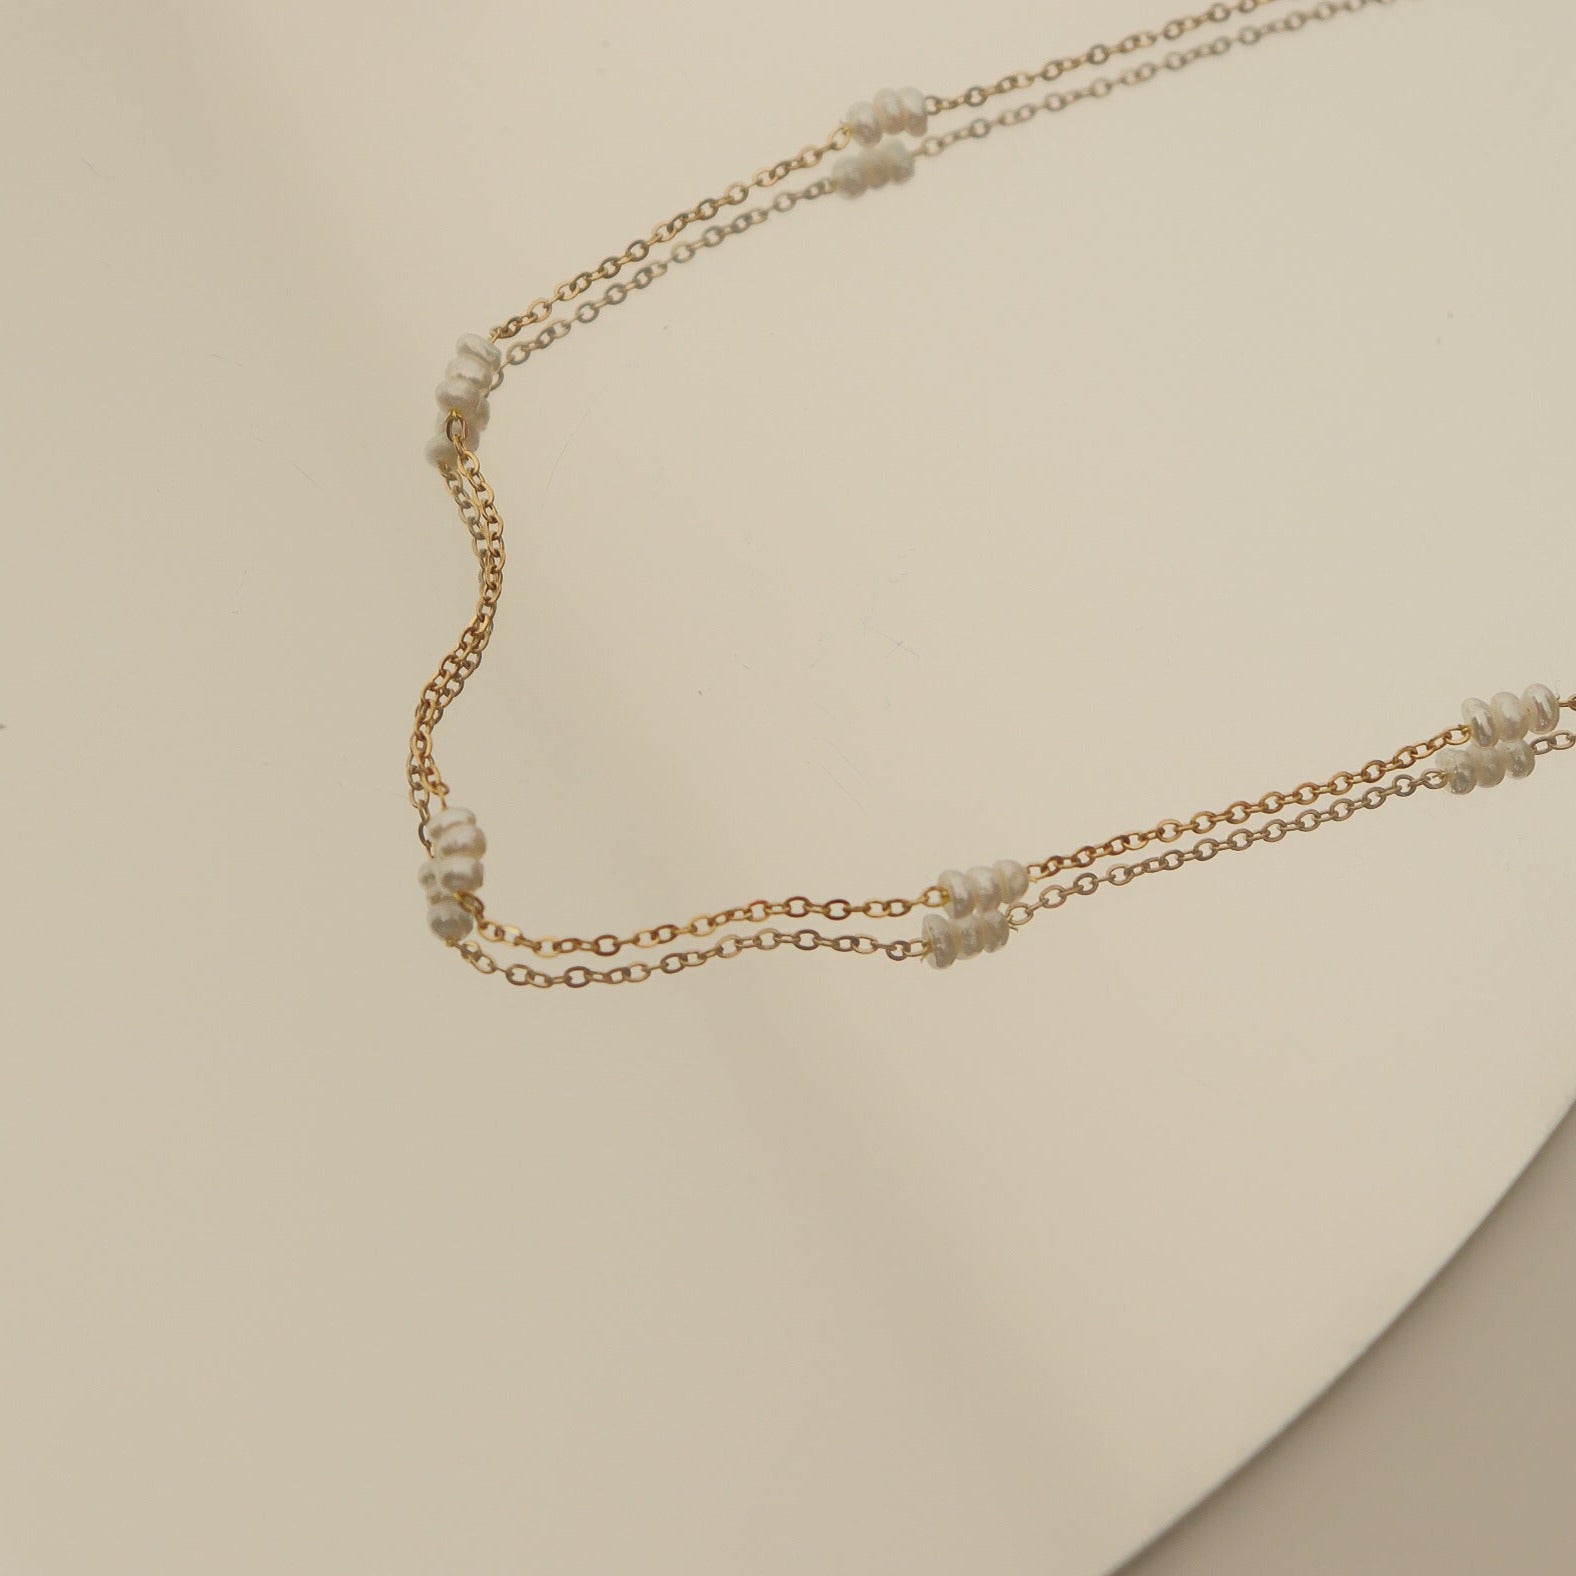 Exquisite Handmade Freshwater Pearl Beaded necklace- A Touch of Elegance for Every Occasion